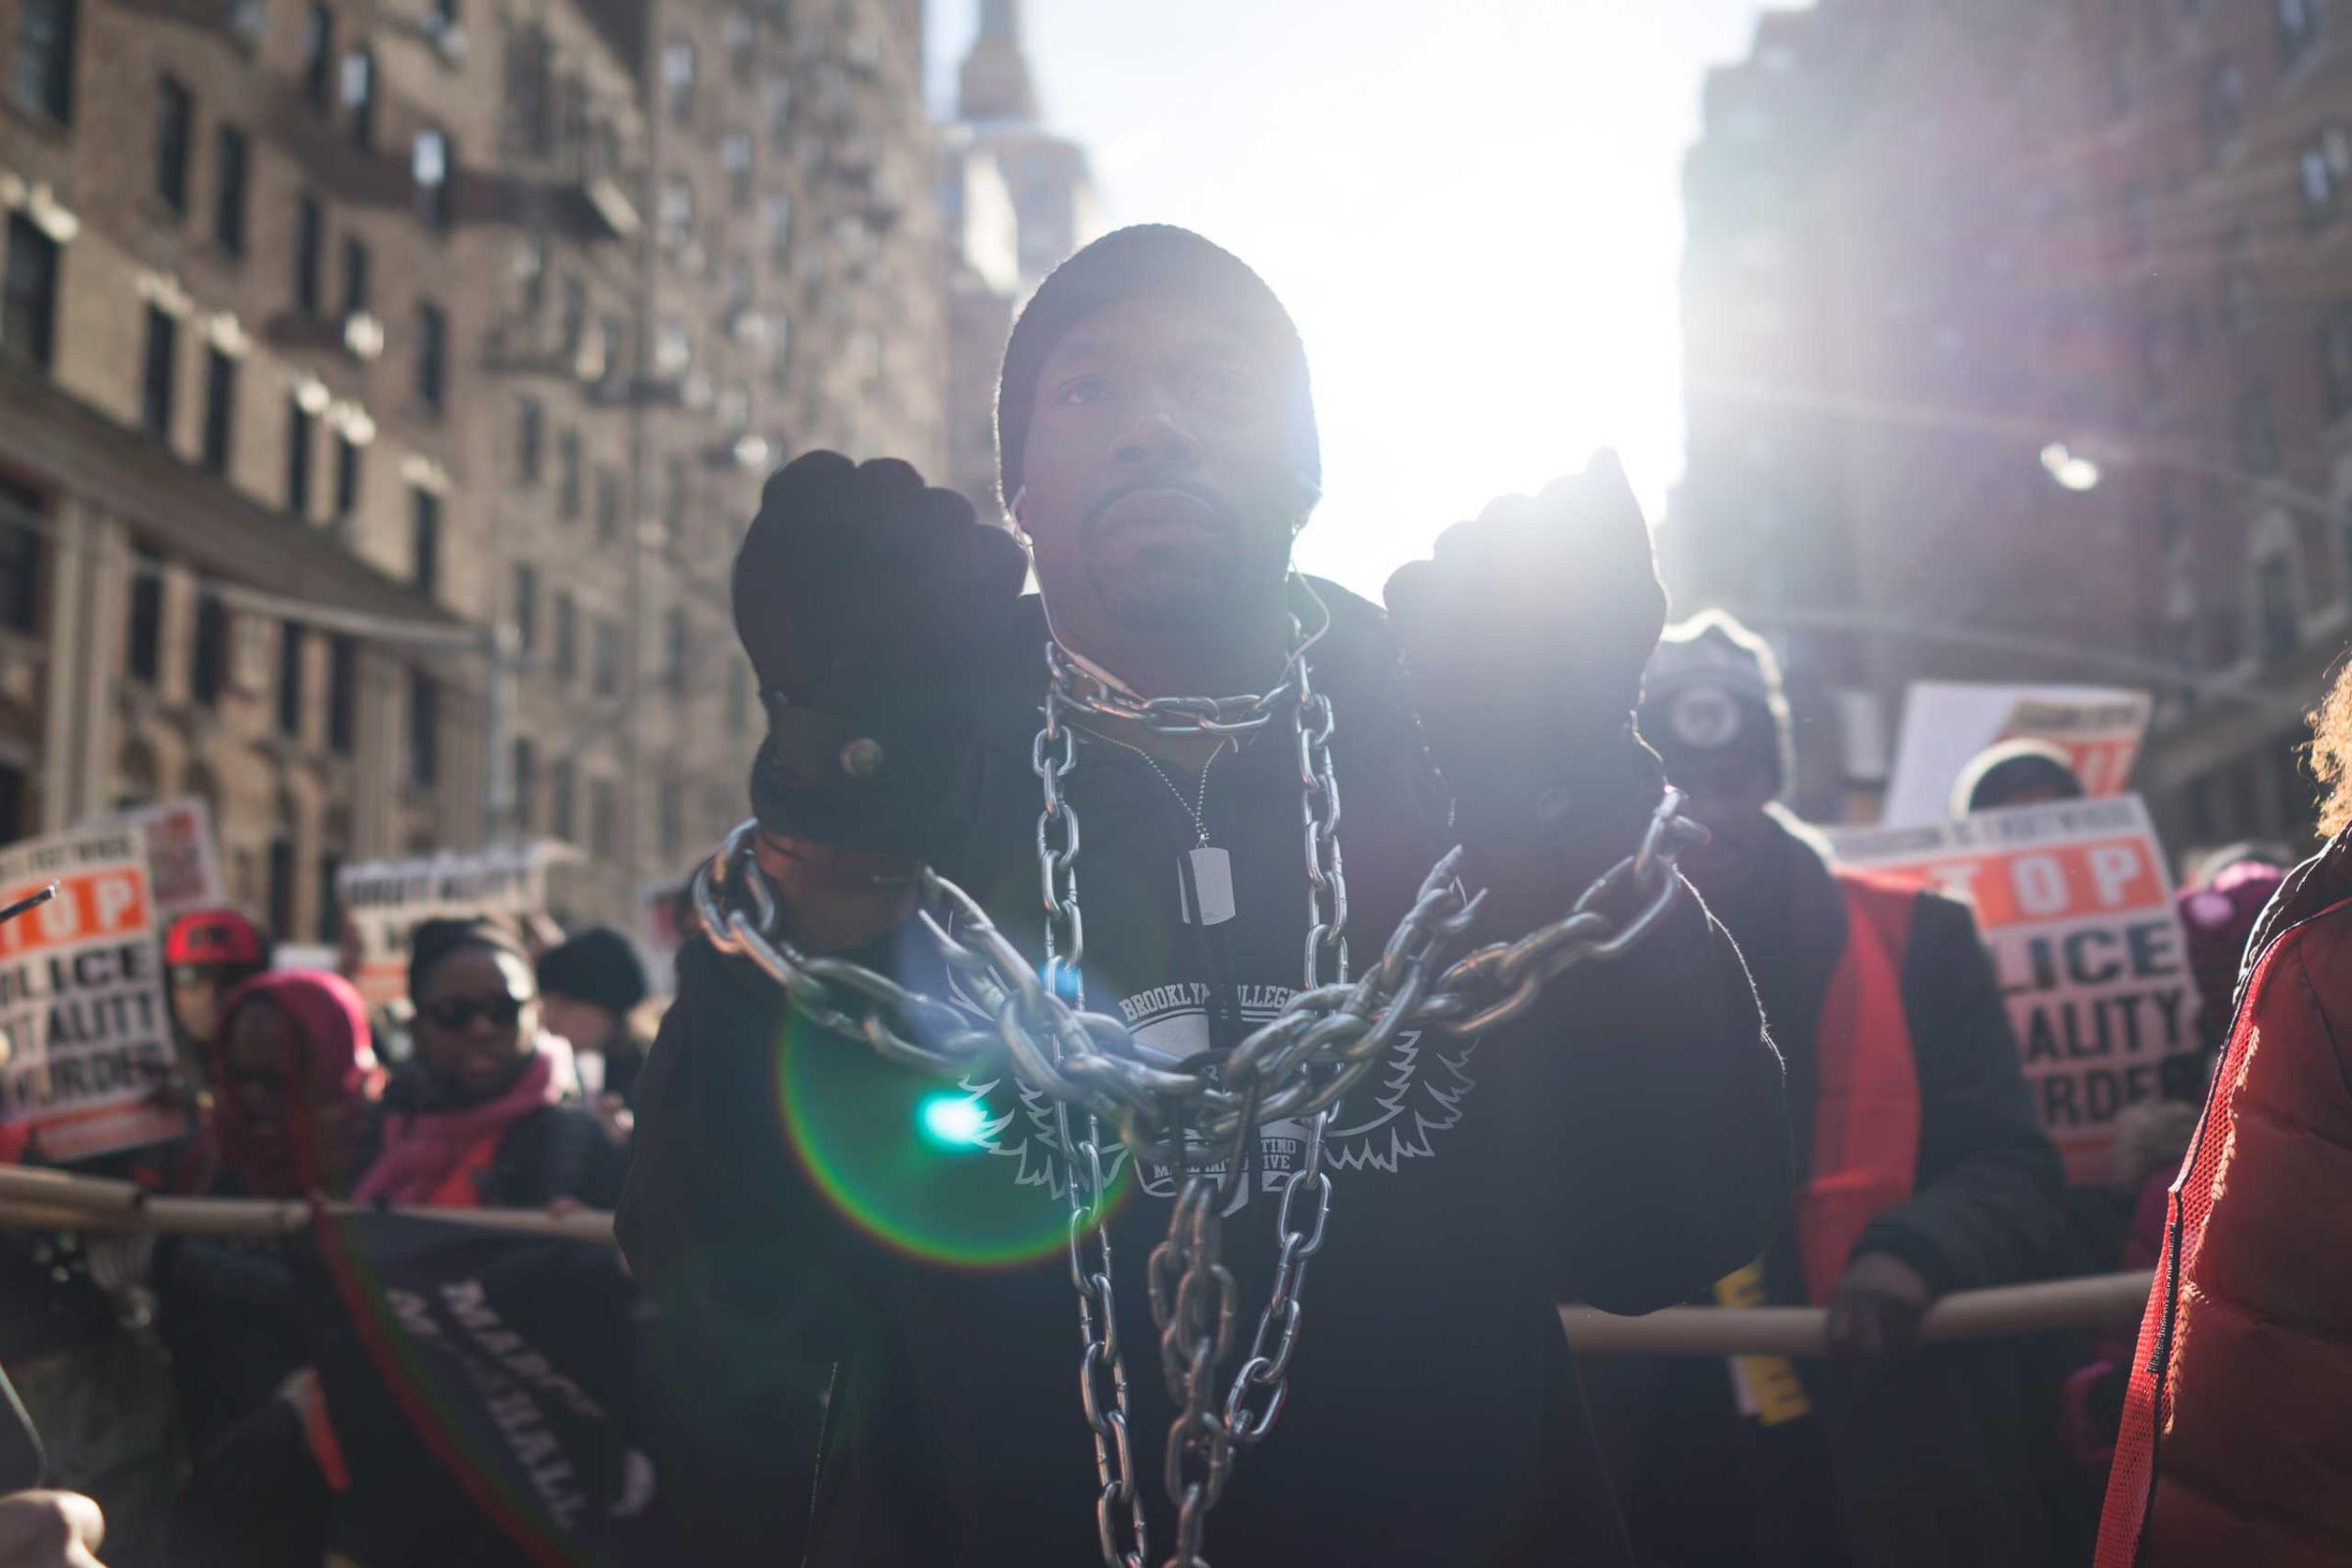 Thousands of protestors came out to demonstrate against police brutality in new York City on Dec. 13, 2014.